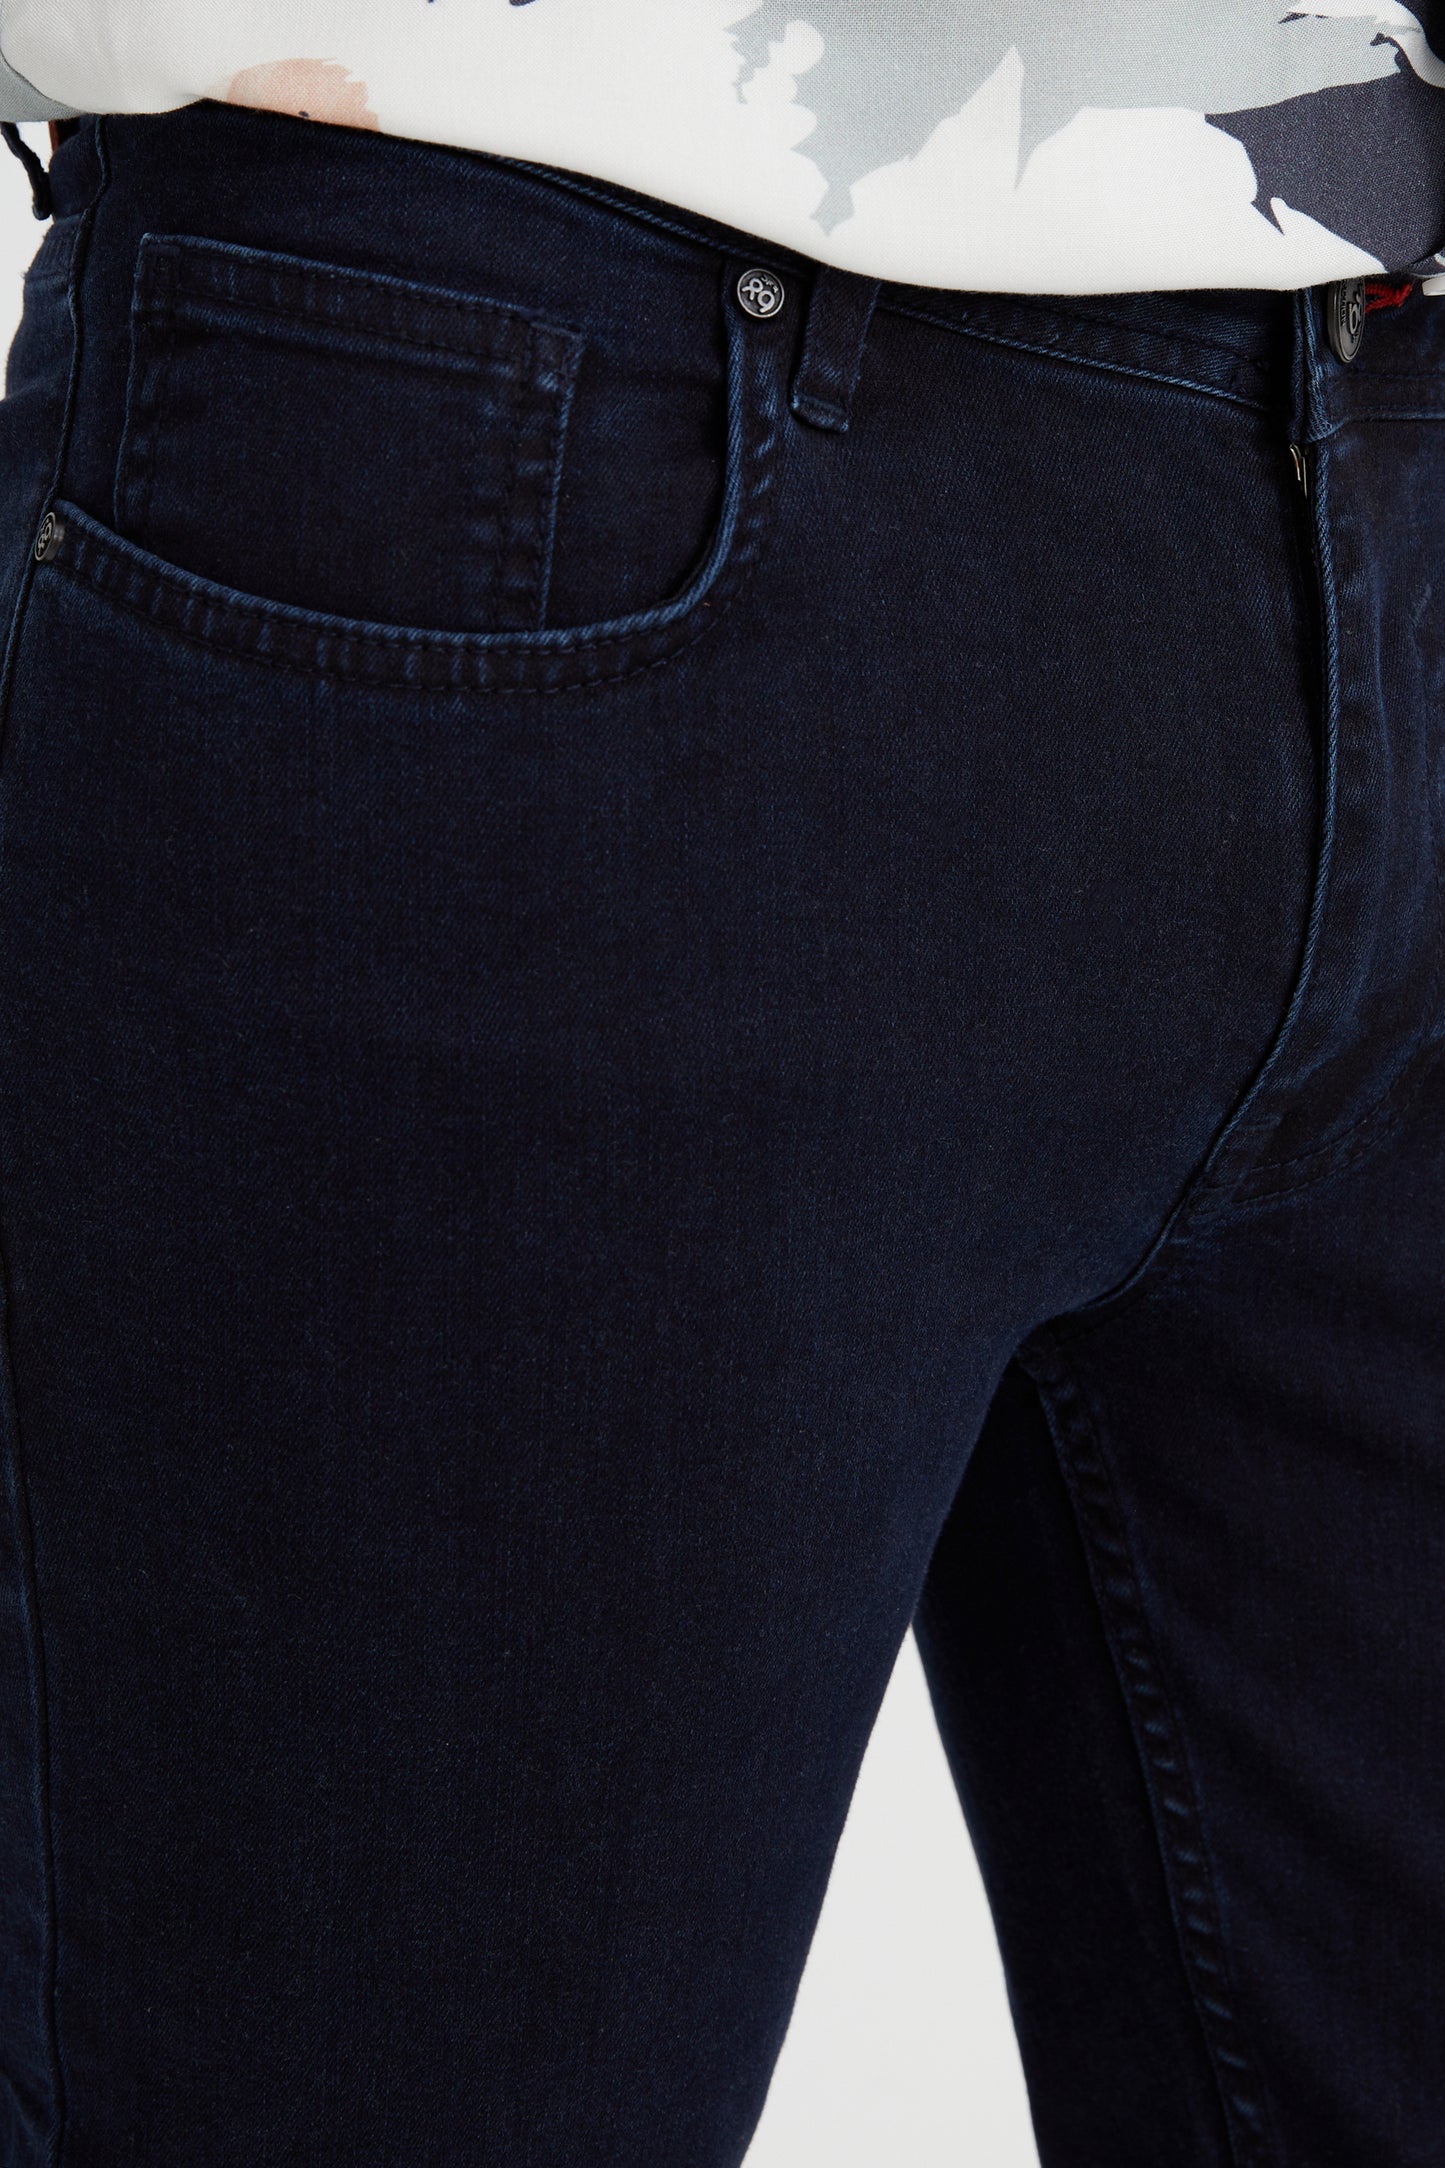 DFR89 Jeans, Carbon. Super stretch, navy blue denim jeans. Built for style and comfort.